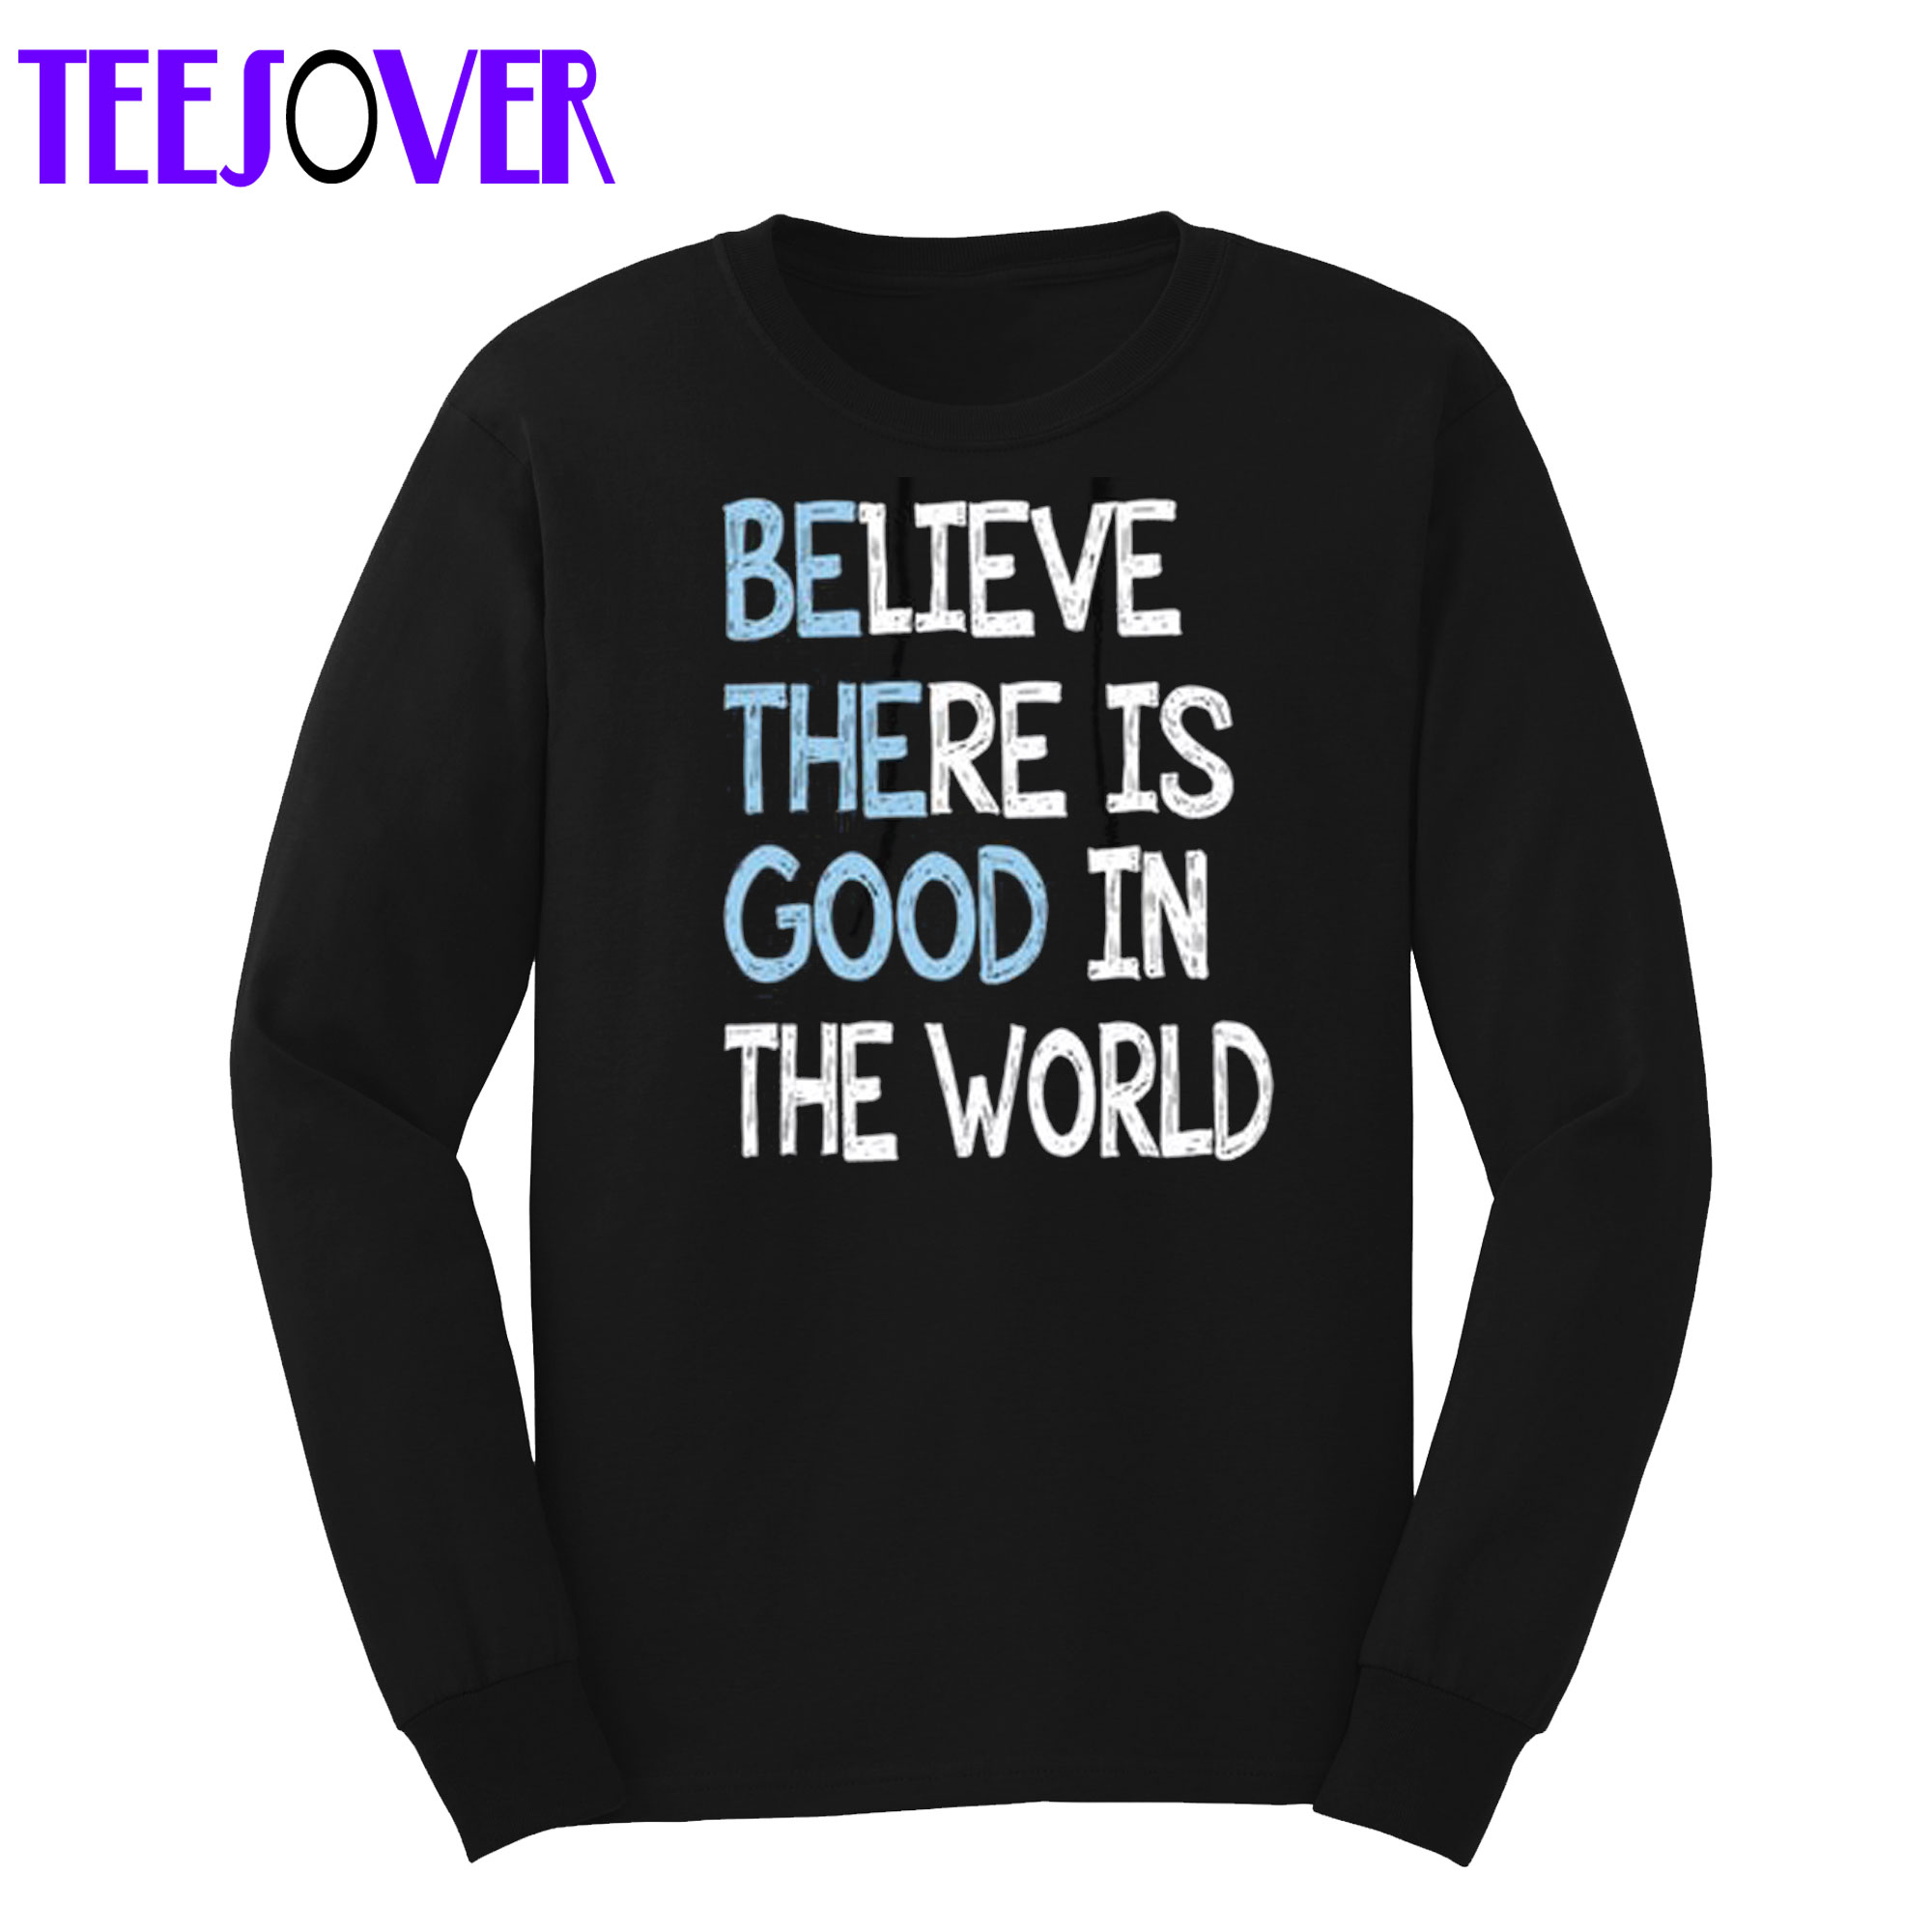 Believe There Is Good In the World Sweatshirt